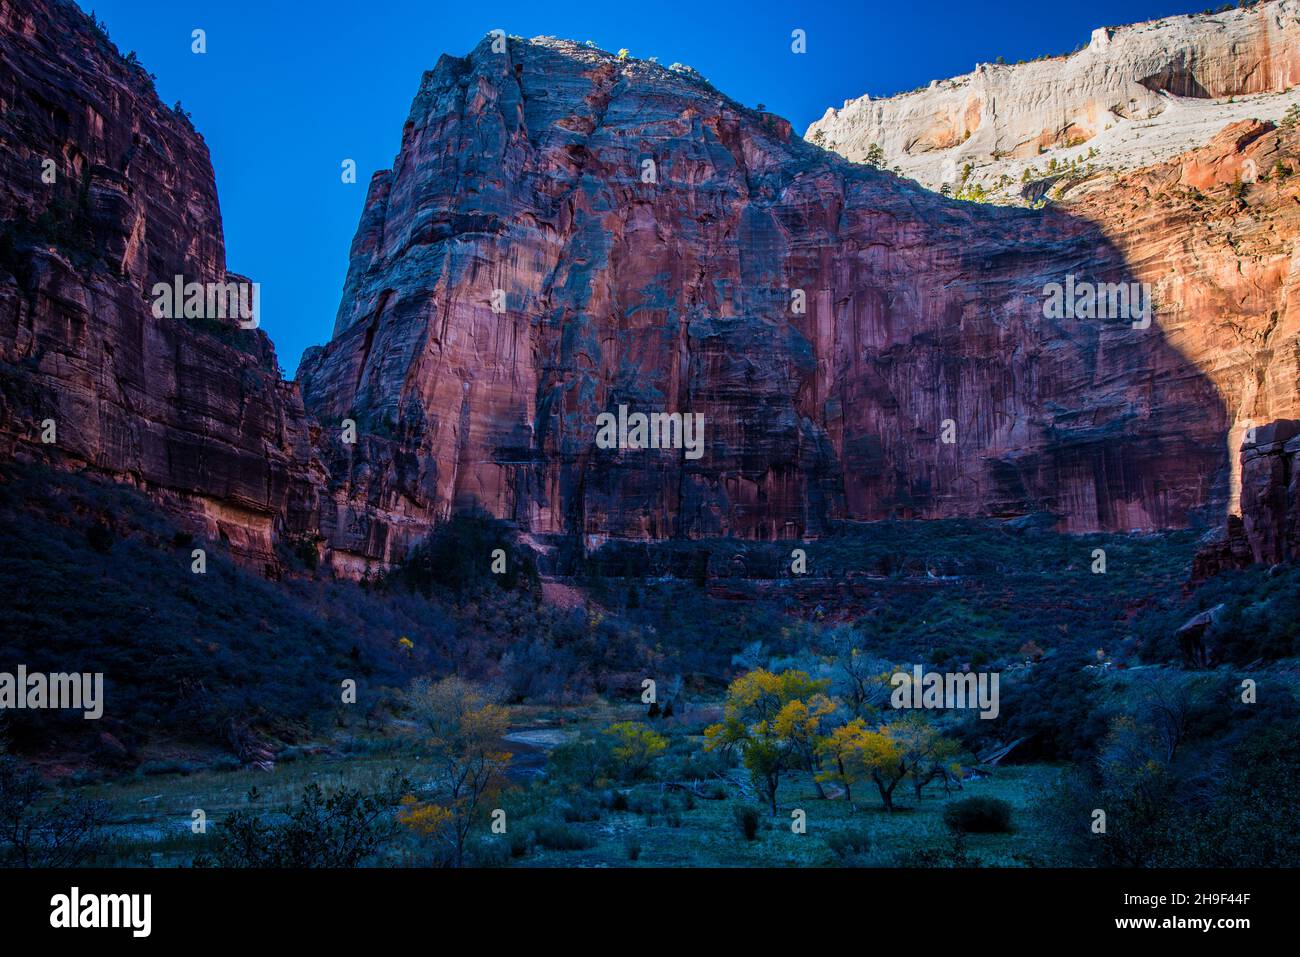 Massive red rock cliffs tower above the Virgin River in Zions National Park.  This view is called, Big Bend.  Views like this are common in the park. Stock Photo